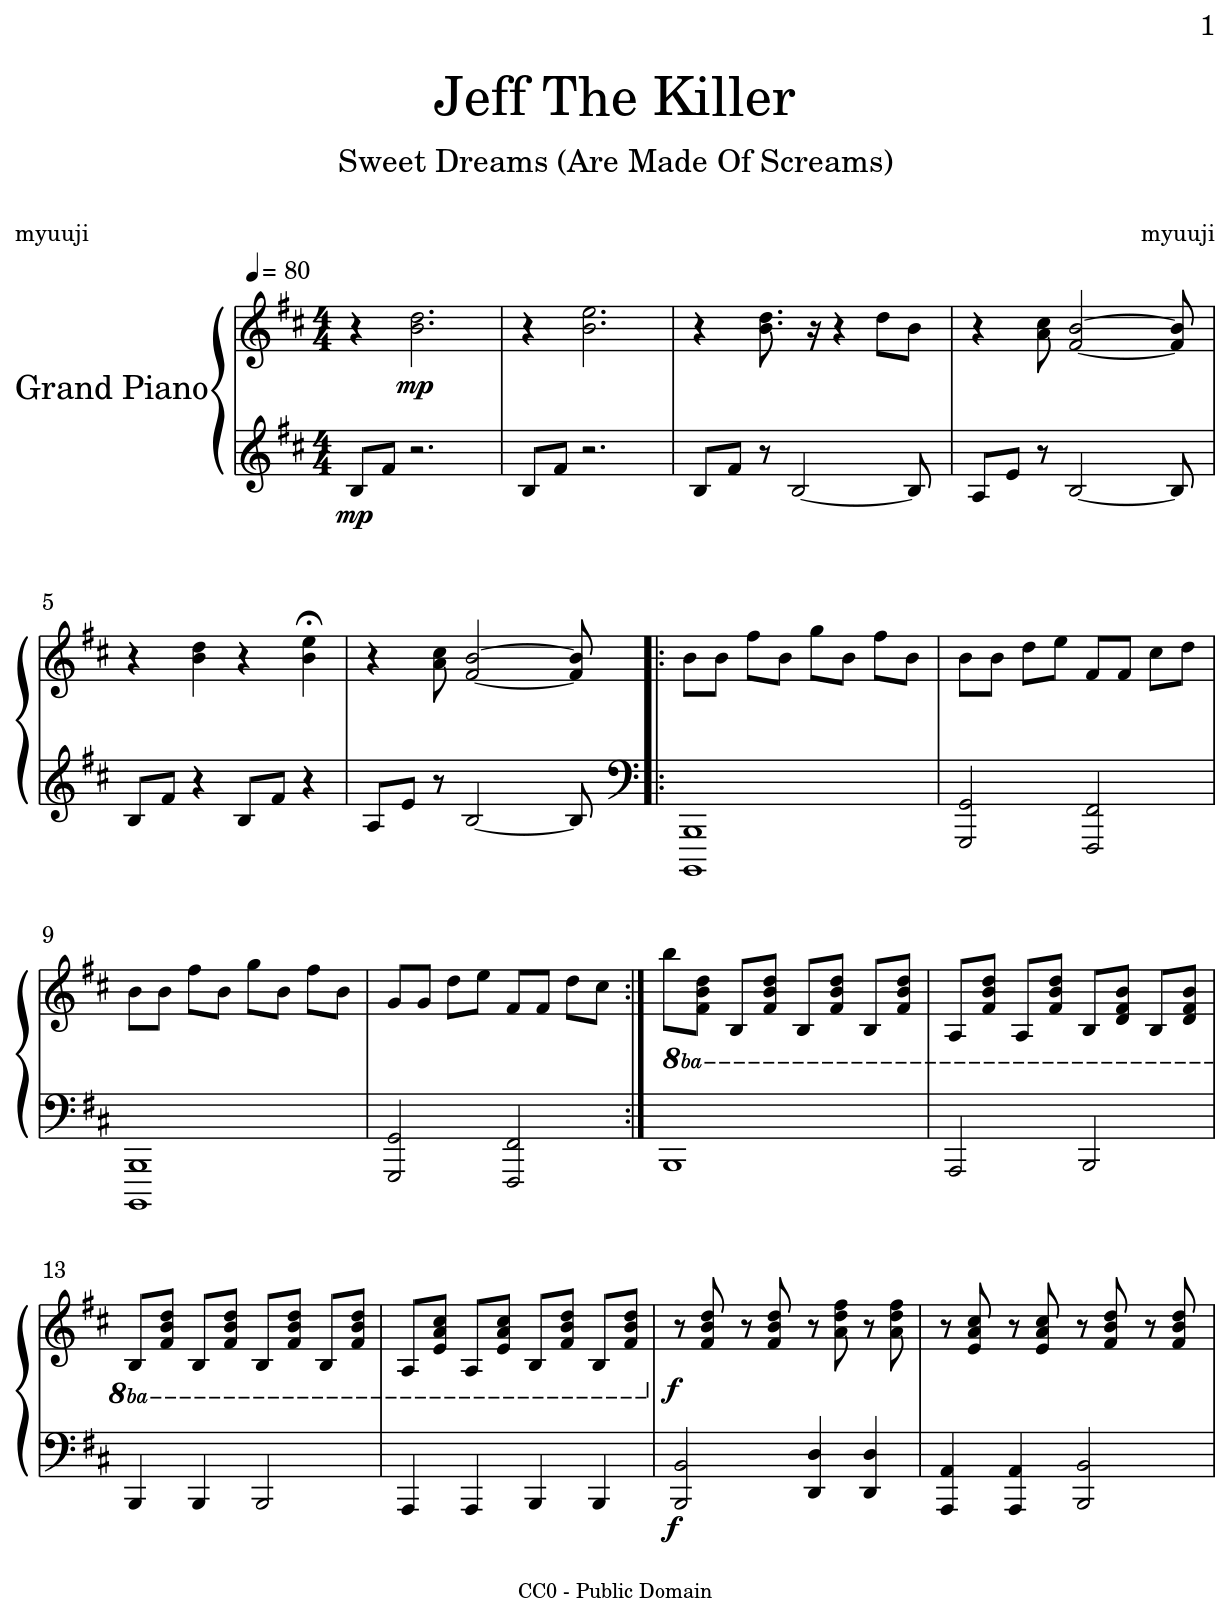 jeff the killer sheet music  Play, print, and download in PDF or MIDI  sheet music on